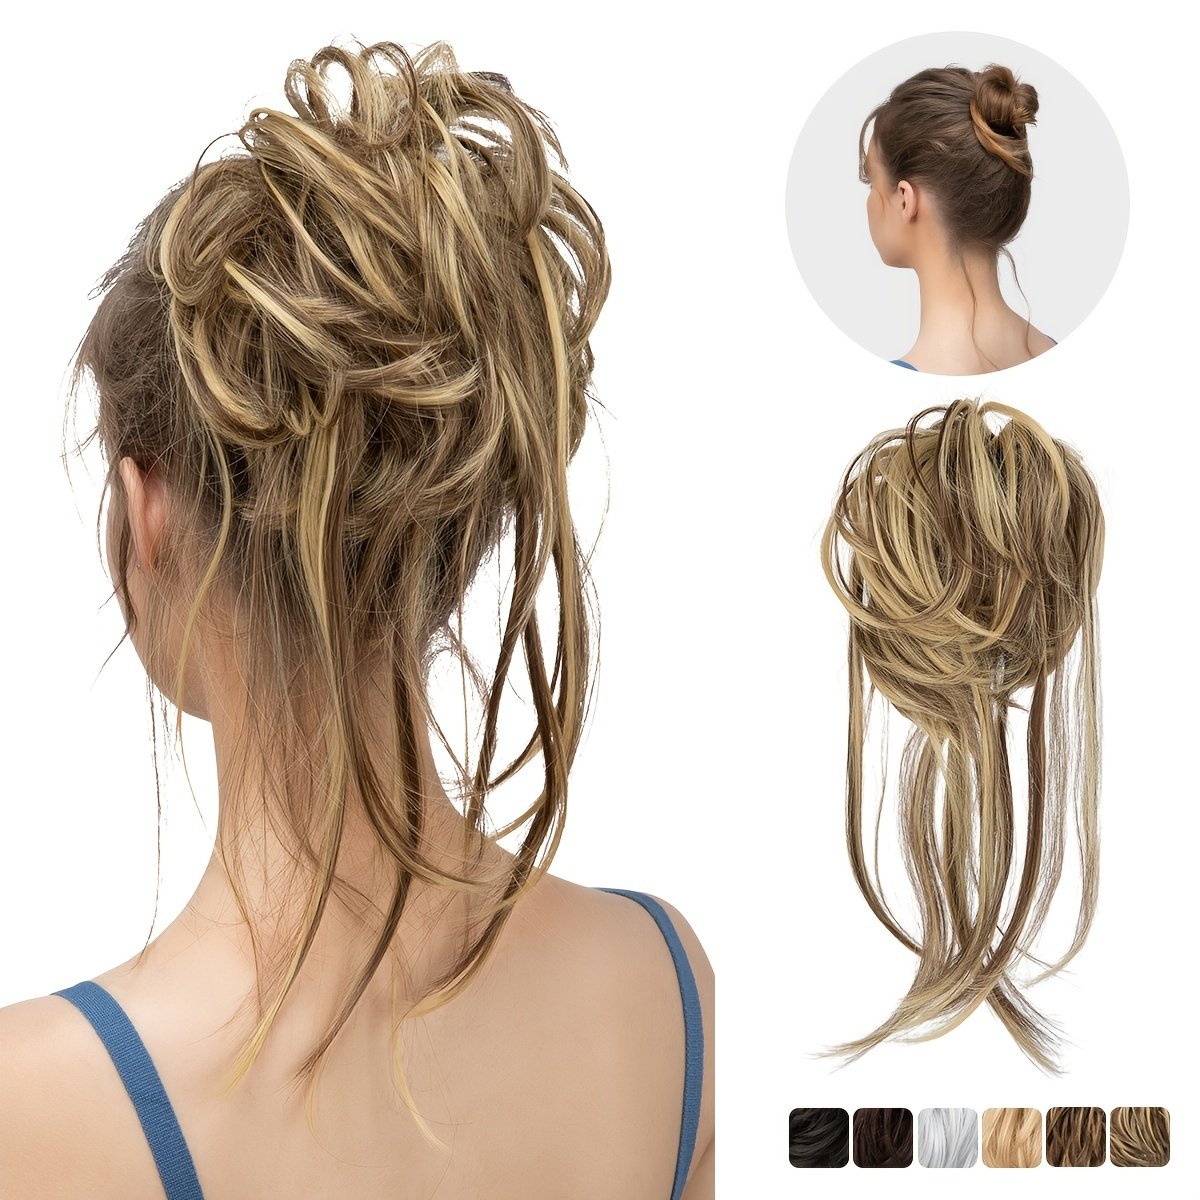 

Messy Bun Hair Piece For Women Super Long Tousled Updo Scrunchies Synthetic Wavy Curly Ponytail Extension Chignon Hair Accessories